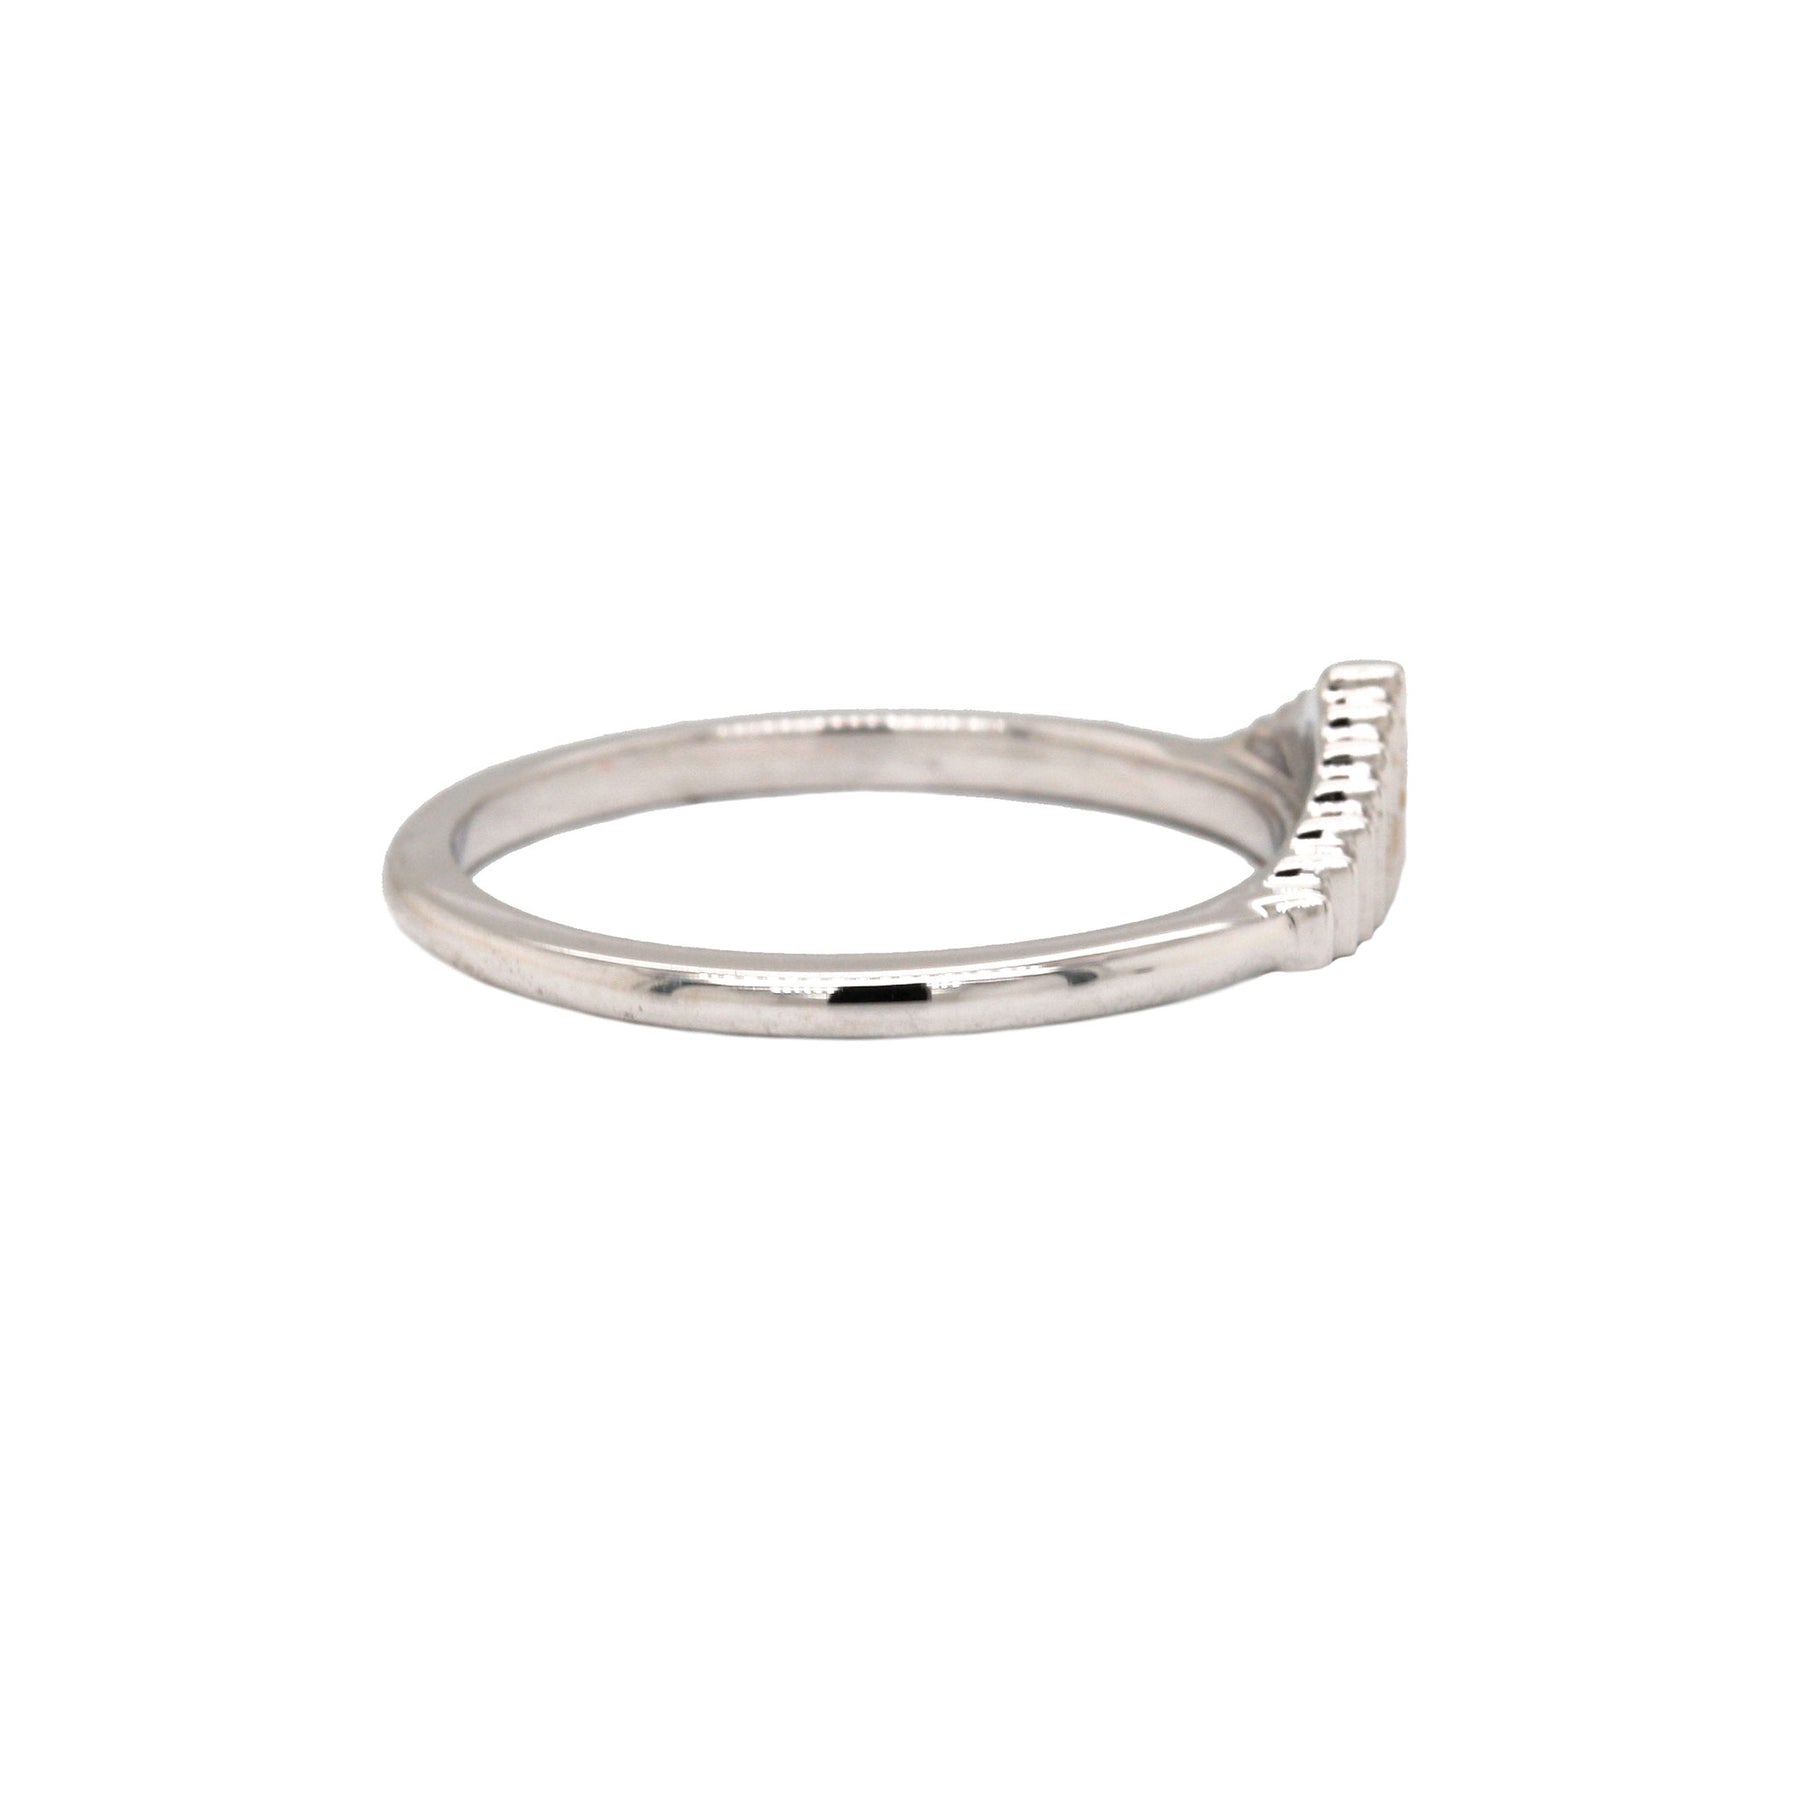 Geometric Stackable White Gold Ring